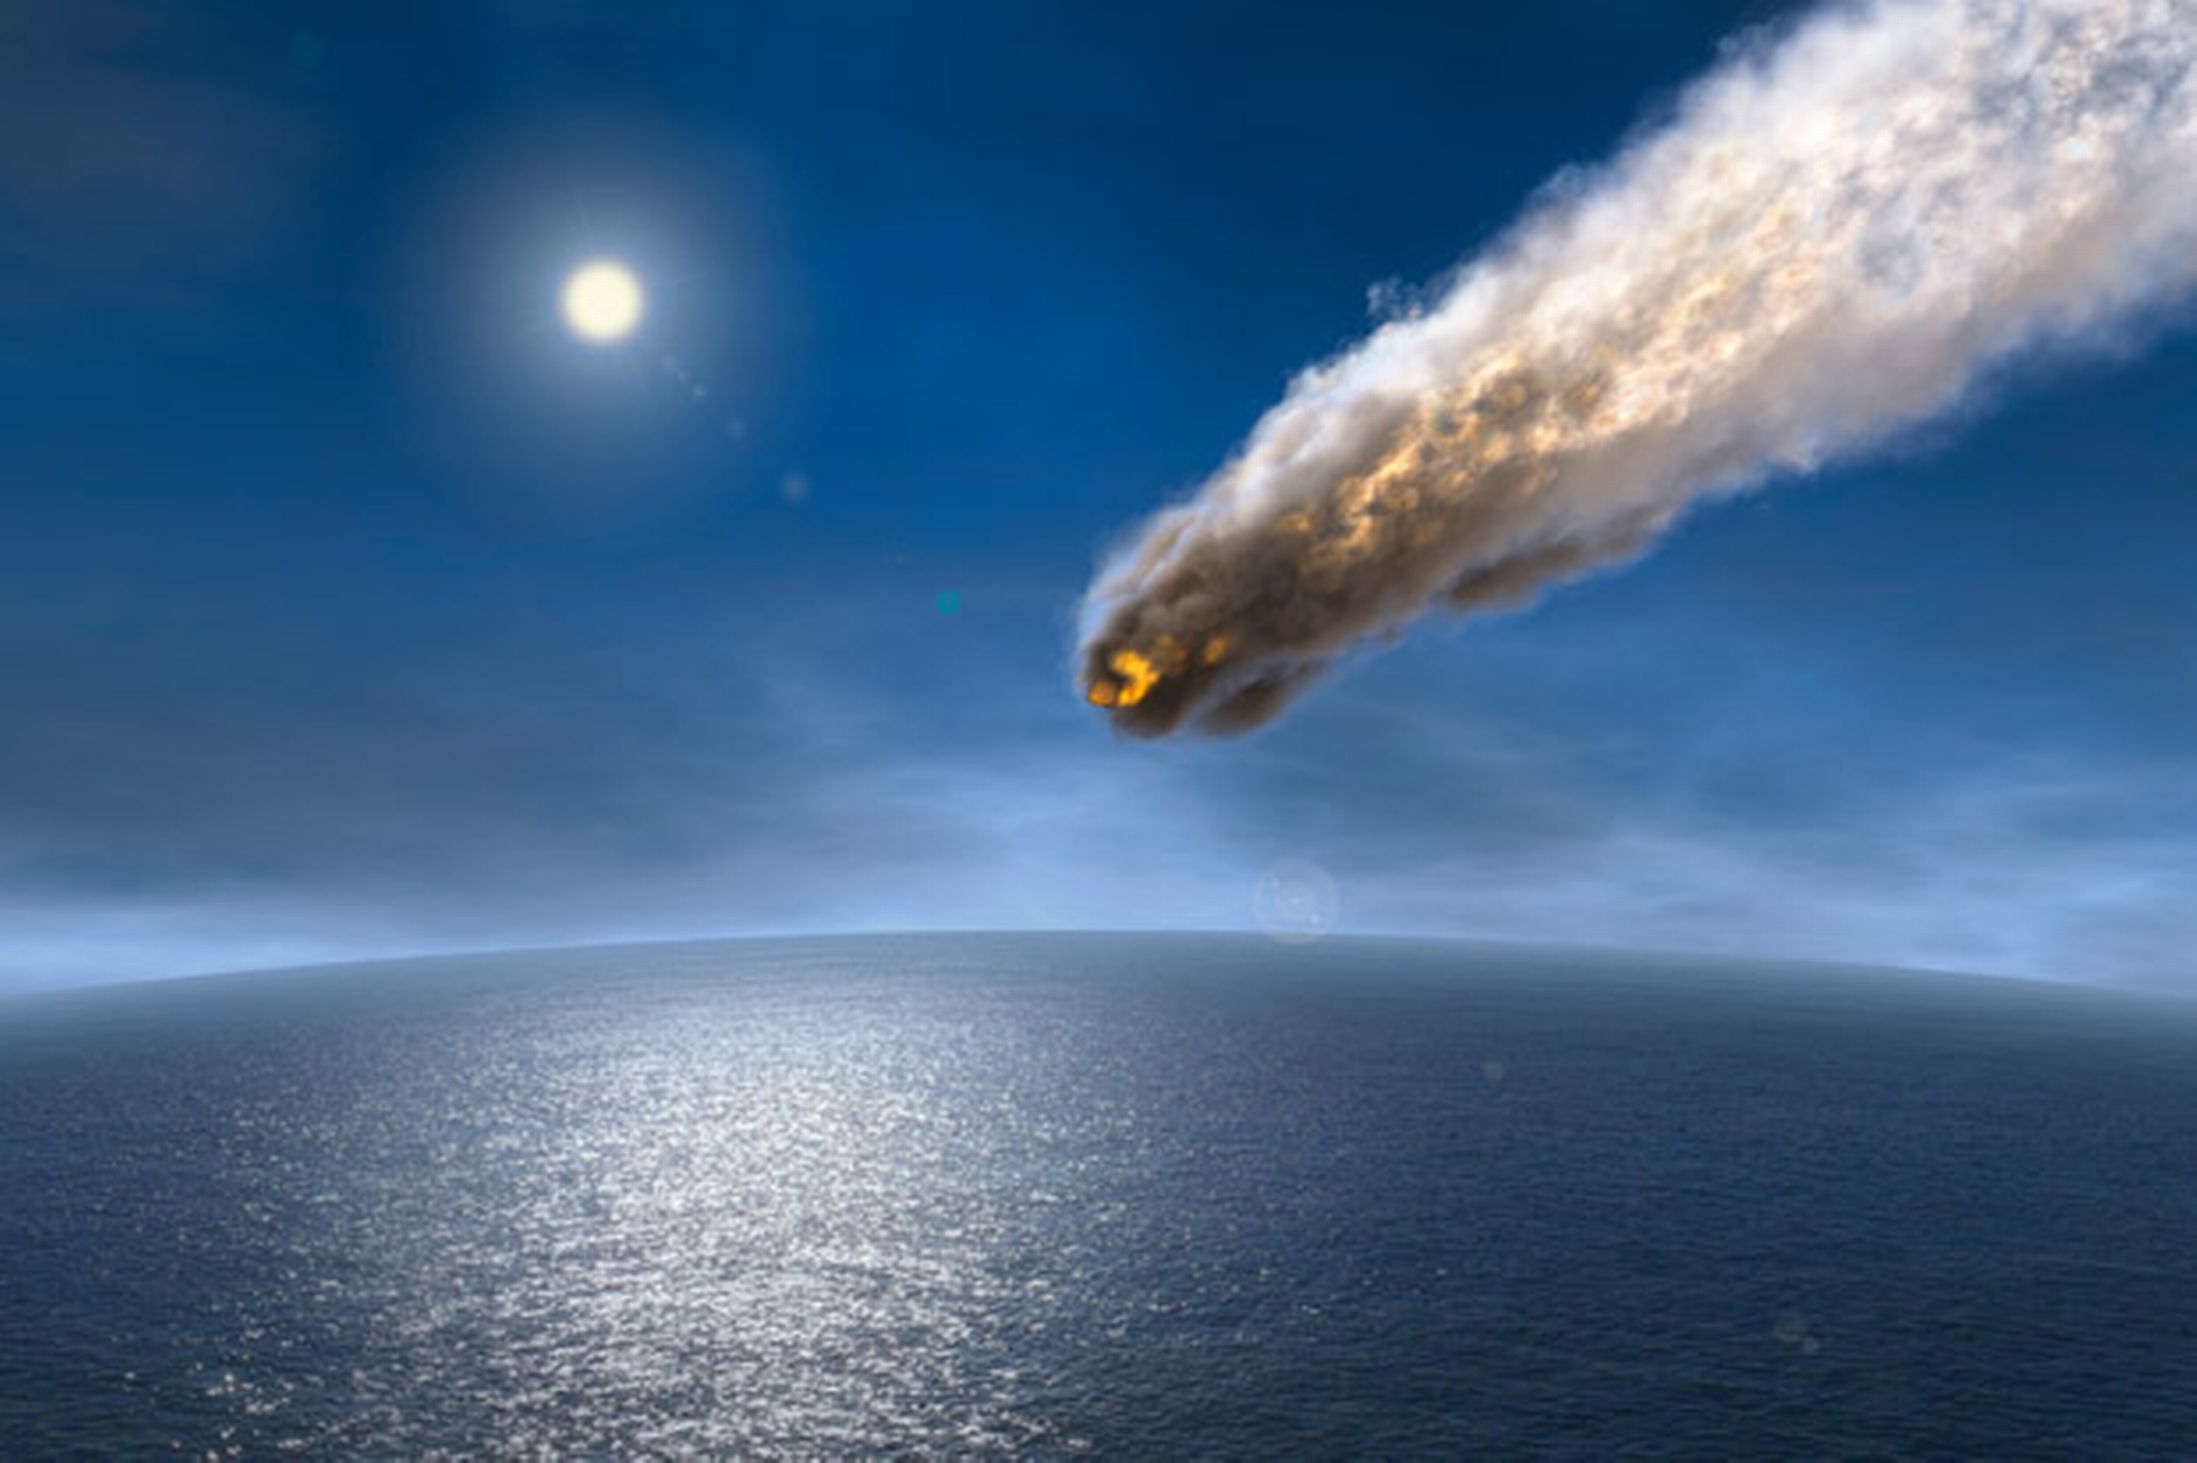 NOT the movies: In the future, humankind will hurl spacecraft into asteroids in “self-defense”